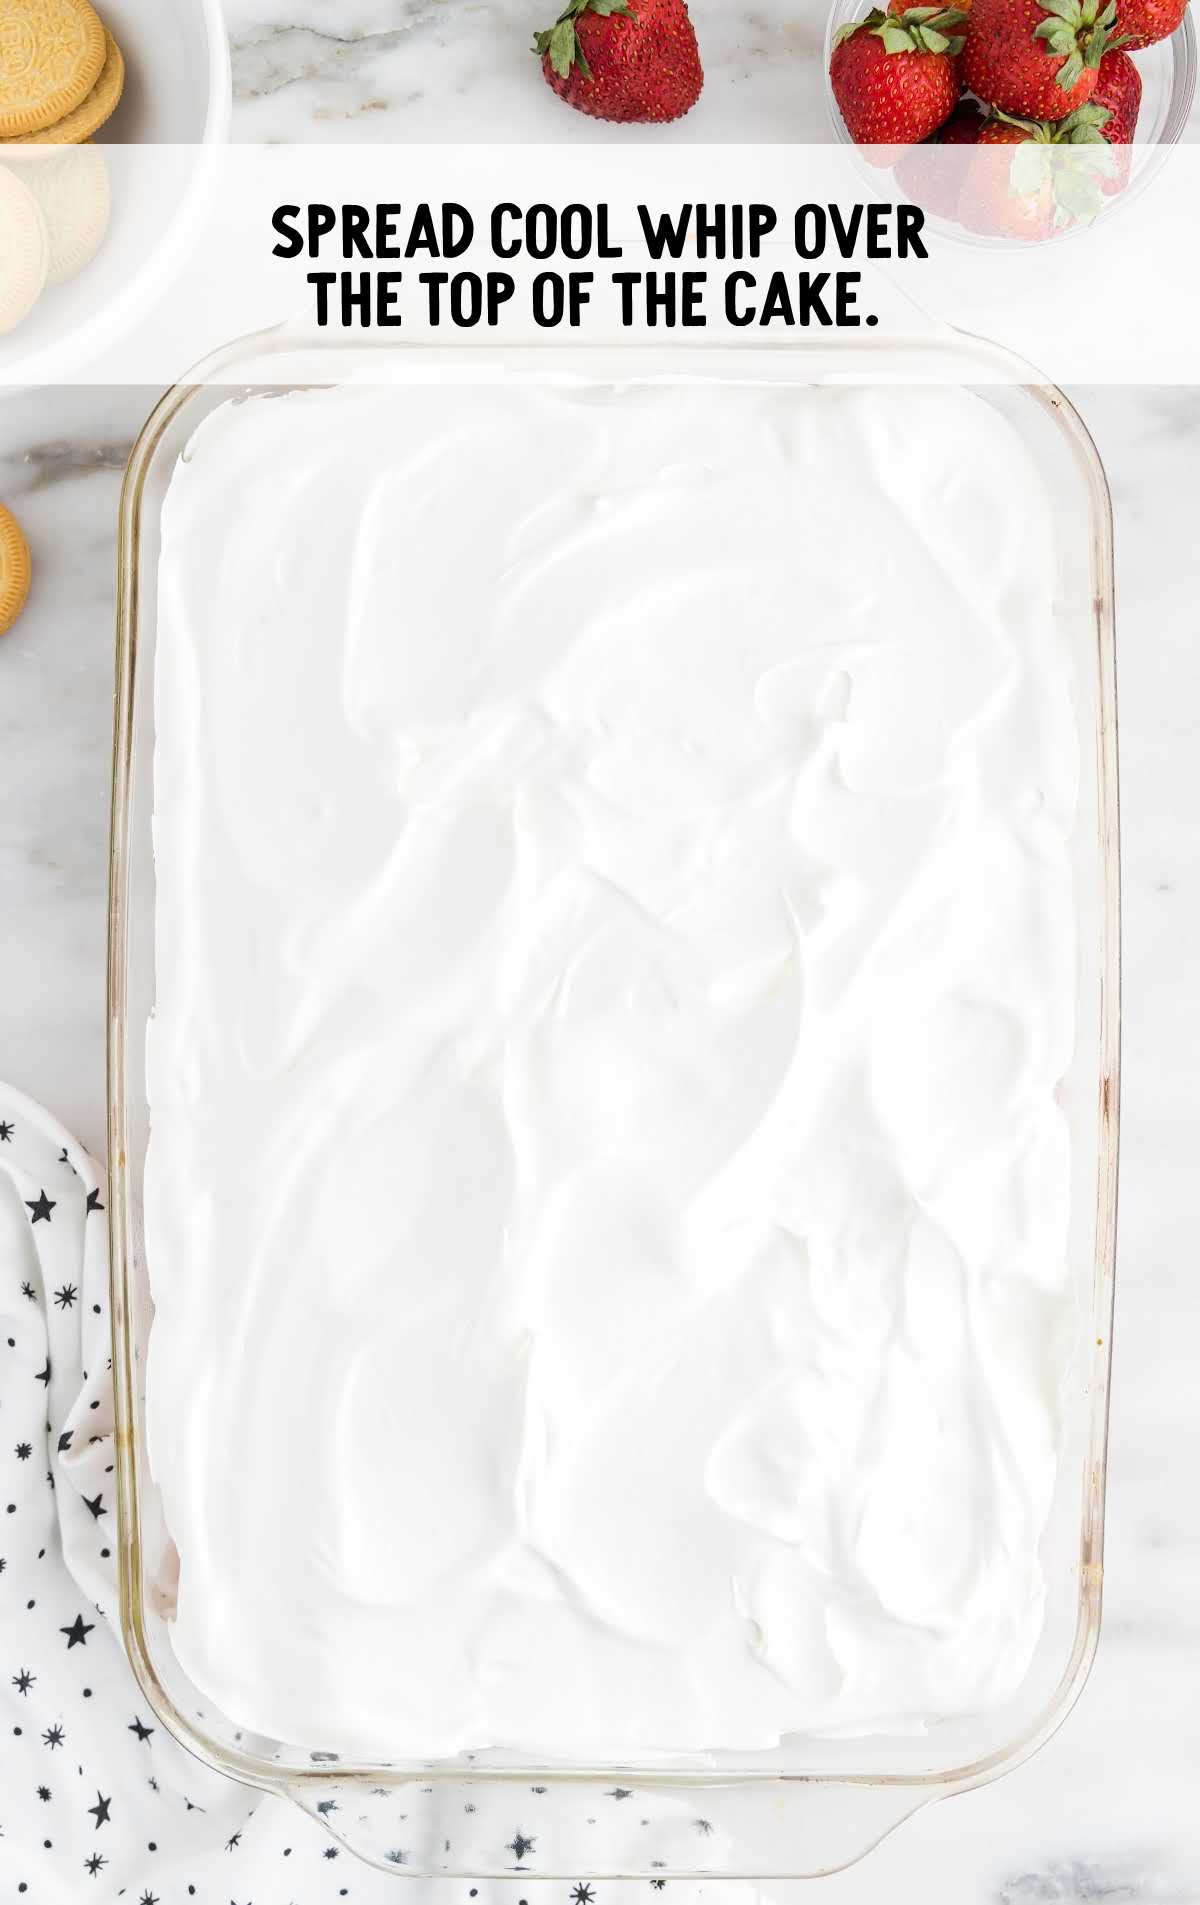 cool whip spread over the cake in a baking dish